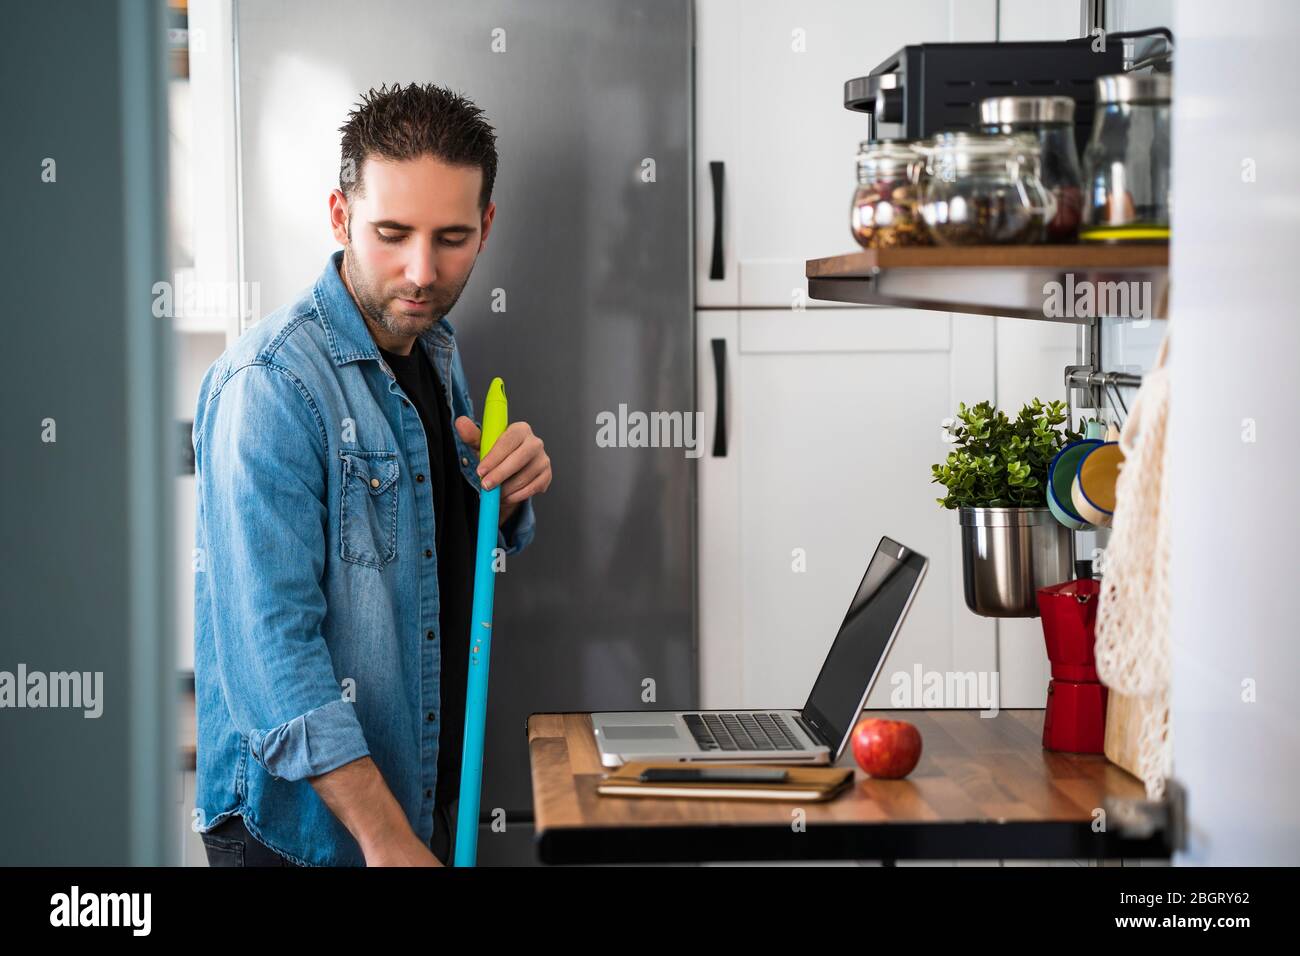 Modern Man with broom sweeping floor in his kitchen at home. Man doing tasks normally done by women. Cleaning, housework and housekeeping concept Stock Photo